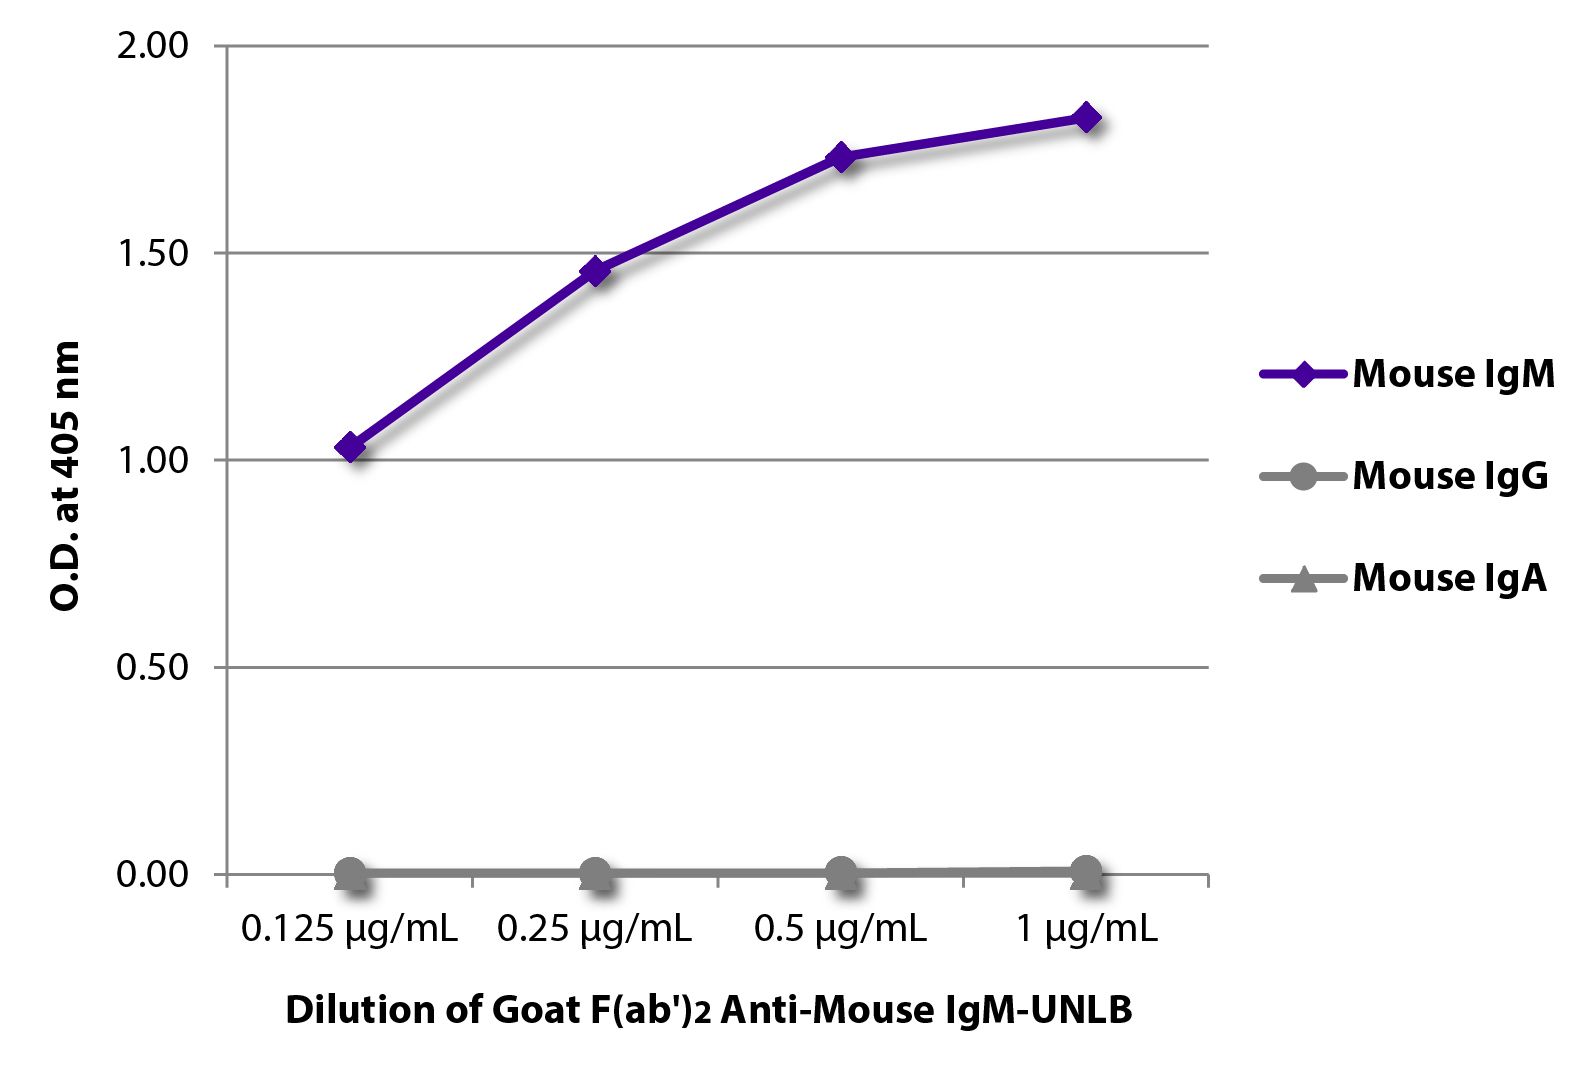 ELISA plate was coated with purified mouse IgM, IgG, and IgA.  Immunoglobulins were detected with serially diluted Goat F(ab')<sub>2</sub> Anti-Mouse IgM-UNLB (SB Cat. No. 1023-01) followed by Swine Anti-Goat IgG(H+L), Human/Rat/Mouse SP ads-HRP (SB Cat. No. 6300-05).